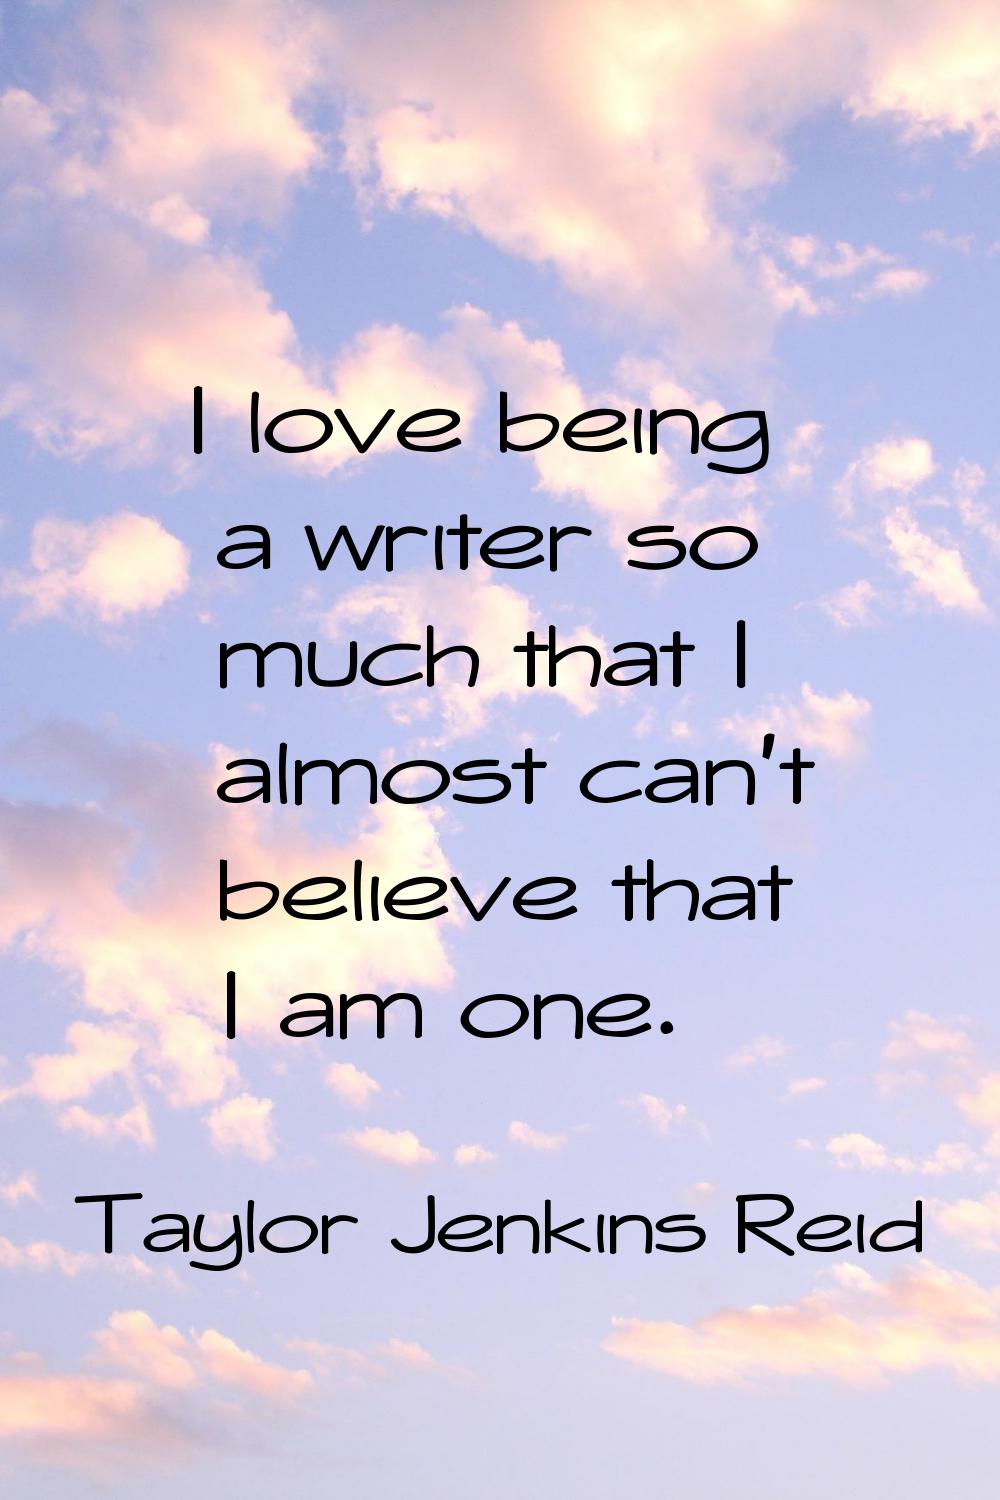 I love being a writer so much that I almost can't believe that I am one.